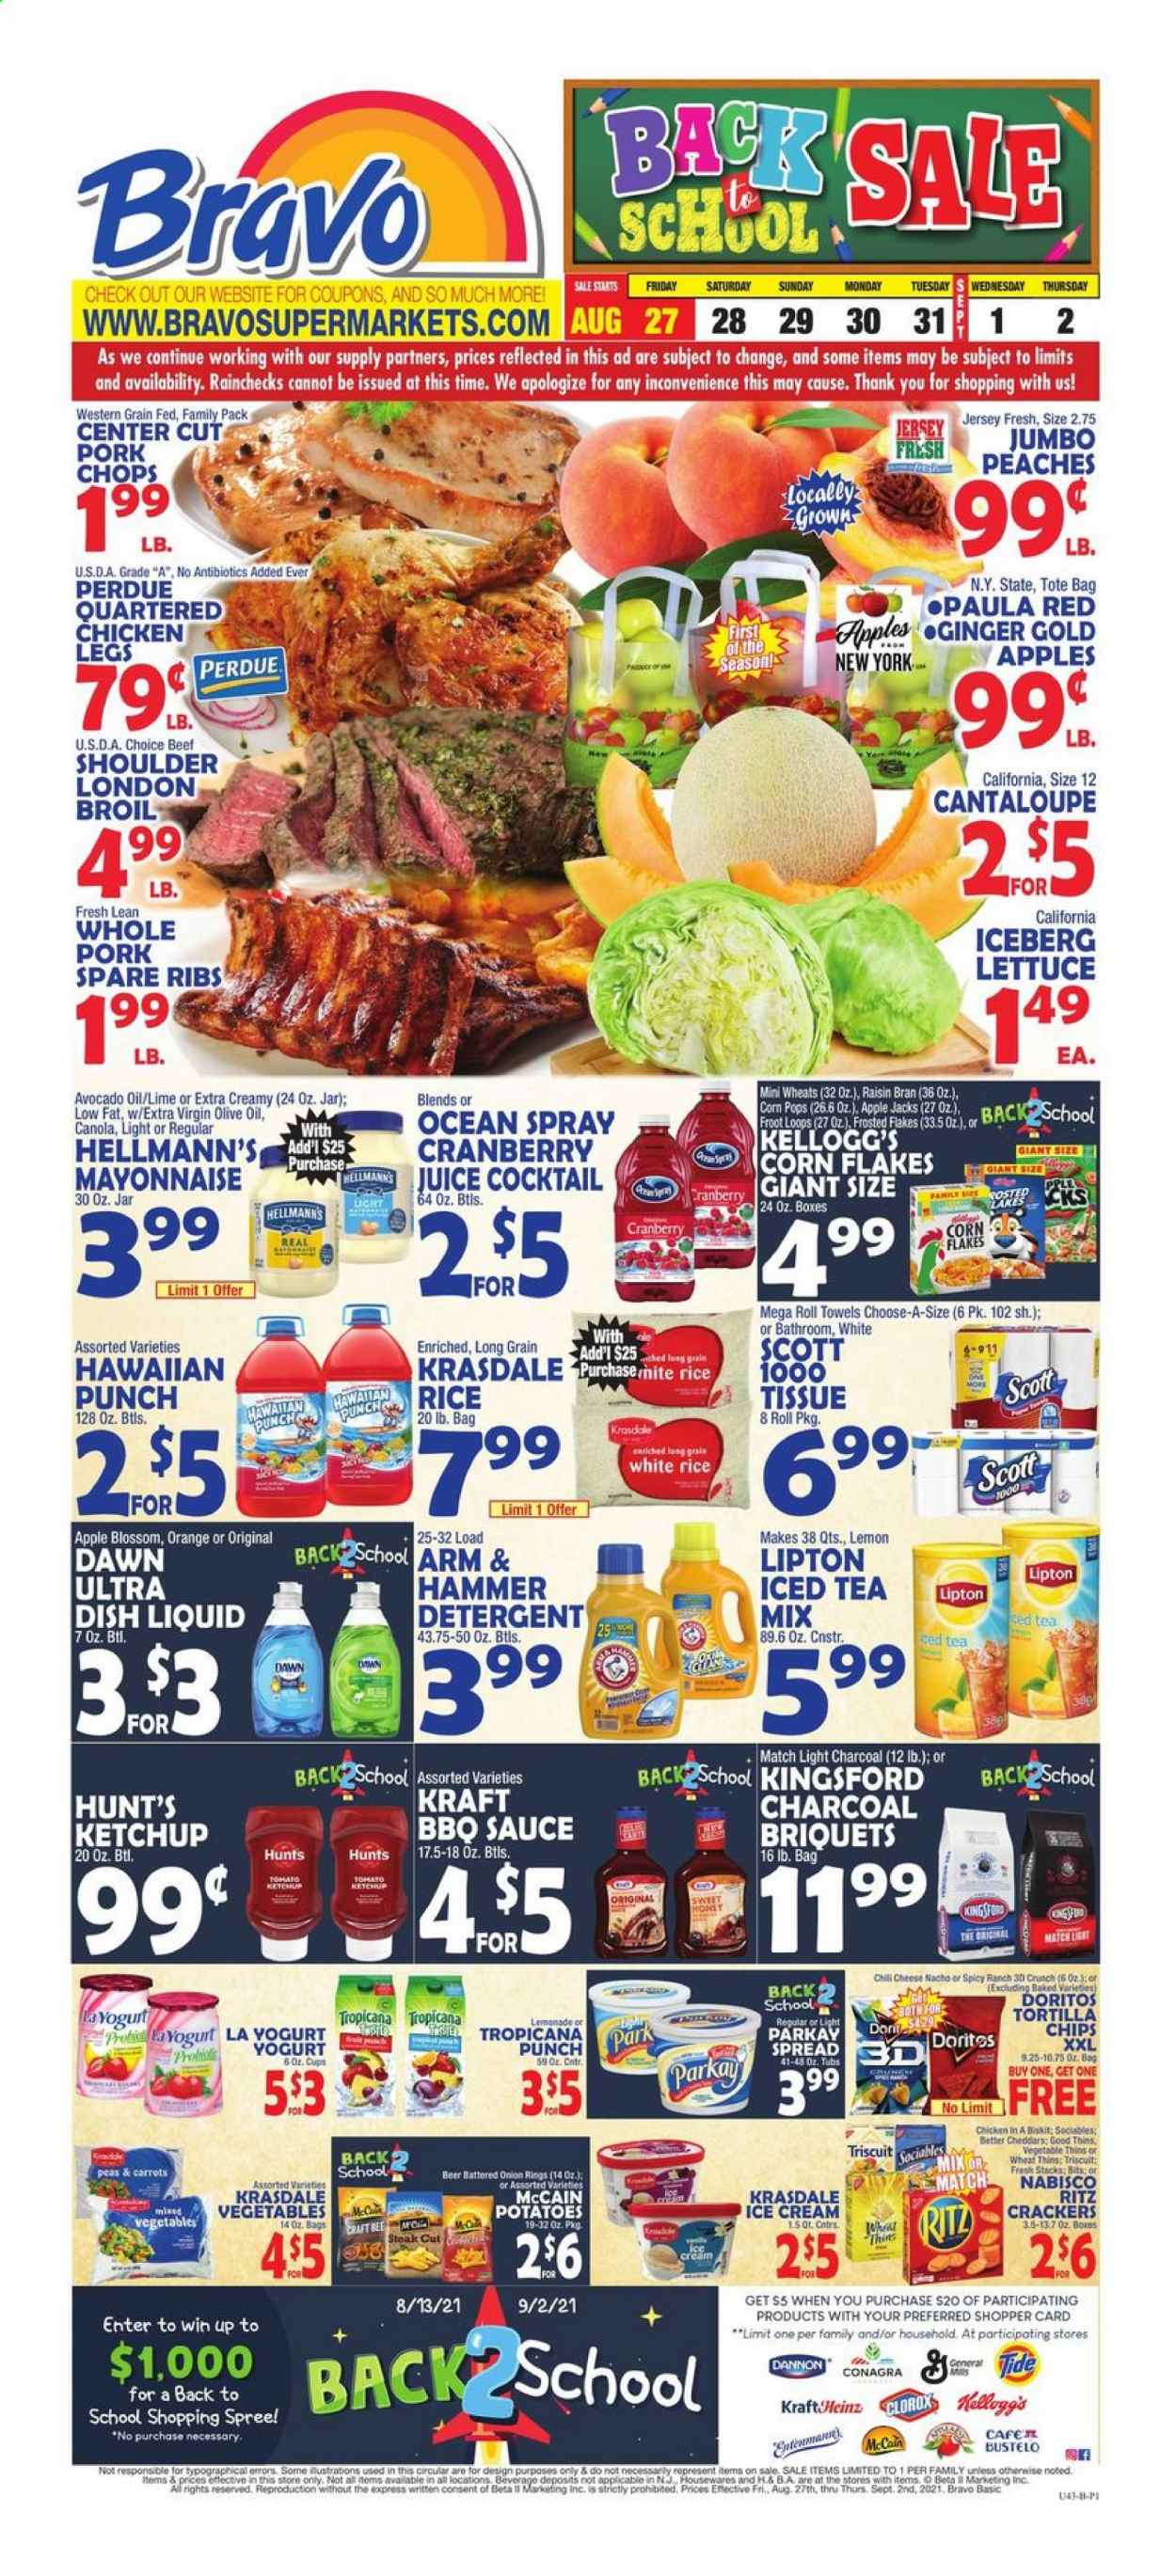 thumbnail - Bravo Supermarkets Flyer - 08/27/2021 - 09/02/2021 - Sales products - cantaloupe, potatoes, lettuce, apples, oranges, onion rings, sauce, Perdue®, Kraft®, cheese, yoghurt, Dannon, Blossom, mayonnaise, Hellmann’s, ice cream, McCain, crackers, Kellogg's, RITZ, Doritos, tortilla chips, chips, Thins, ARM & HAMMER, corn flakes, Frosted Flakes, Corn Pops, Raisin Bran, white rice, BBQ sauce, ketchup, avocado oil, extra virgin olive oil, olive oil, lemonade, juice, Lipton, ice tea, fruit punch, beer, chicken legs, steak, pork meat, pork ribs, pork spare ribs, peaches. Page 1.